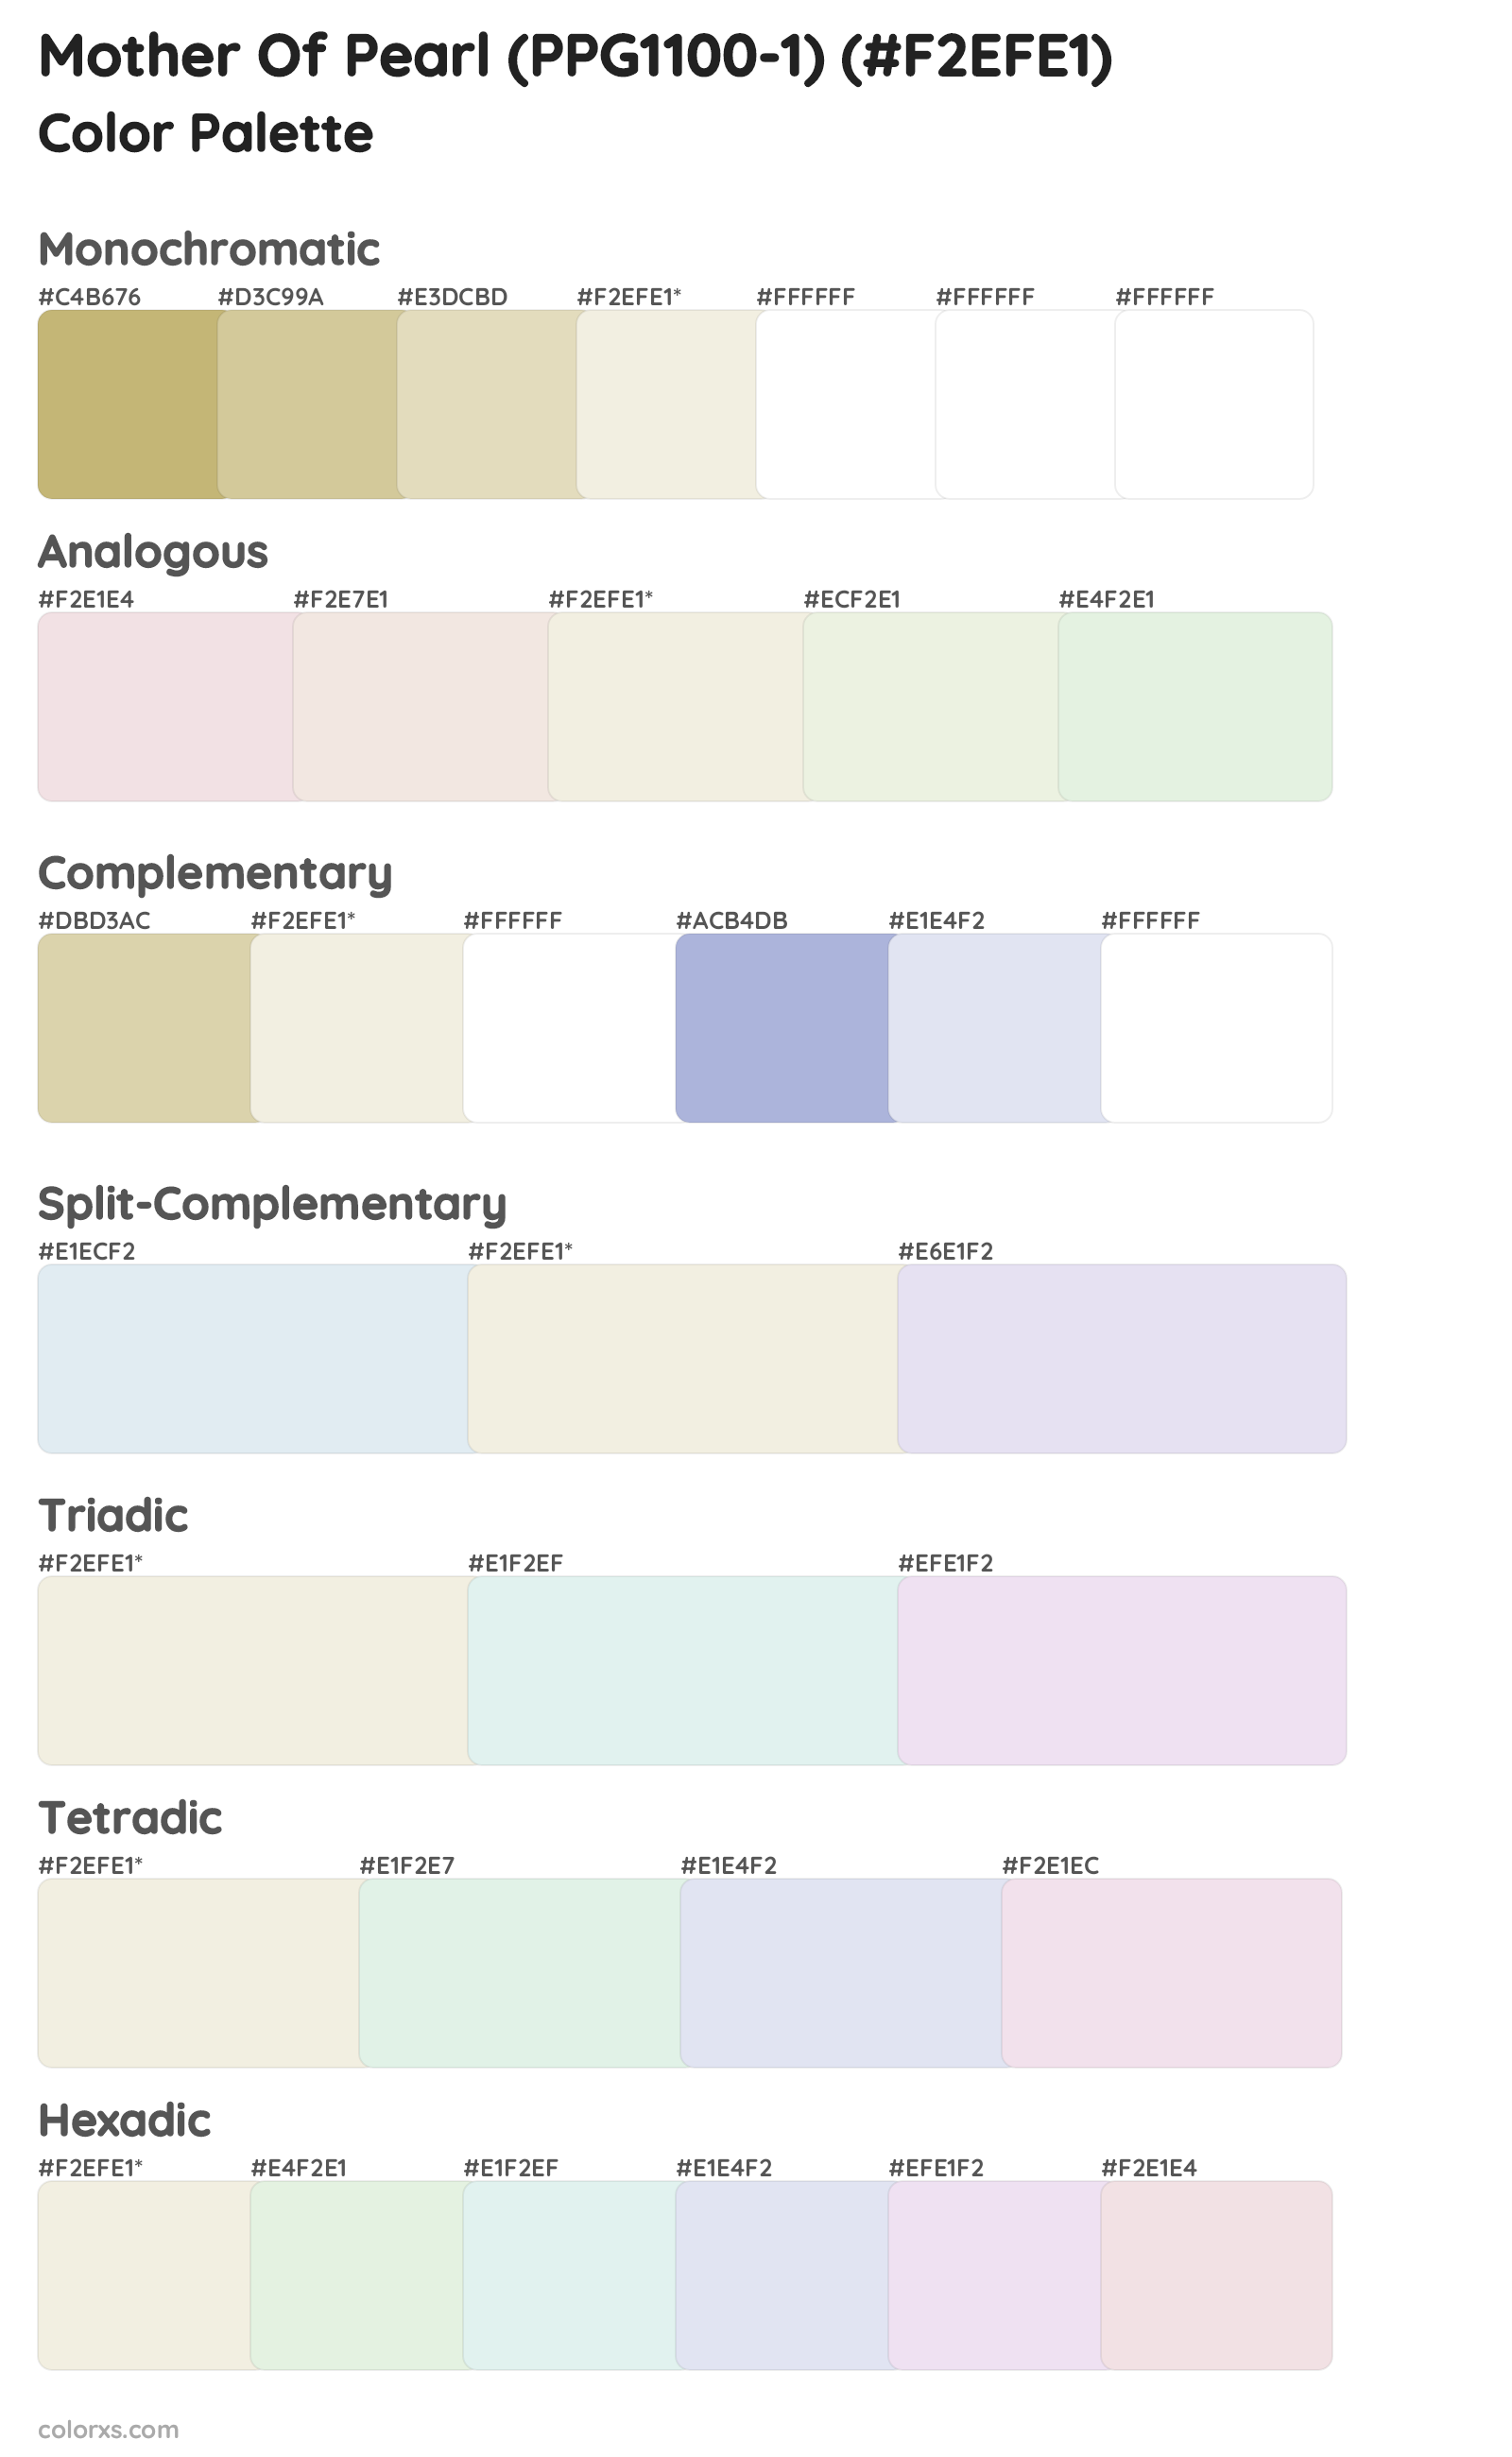 Mother Of Pearl (PPG1100-1) Color Scheme Palettes